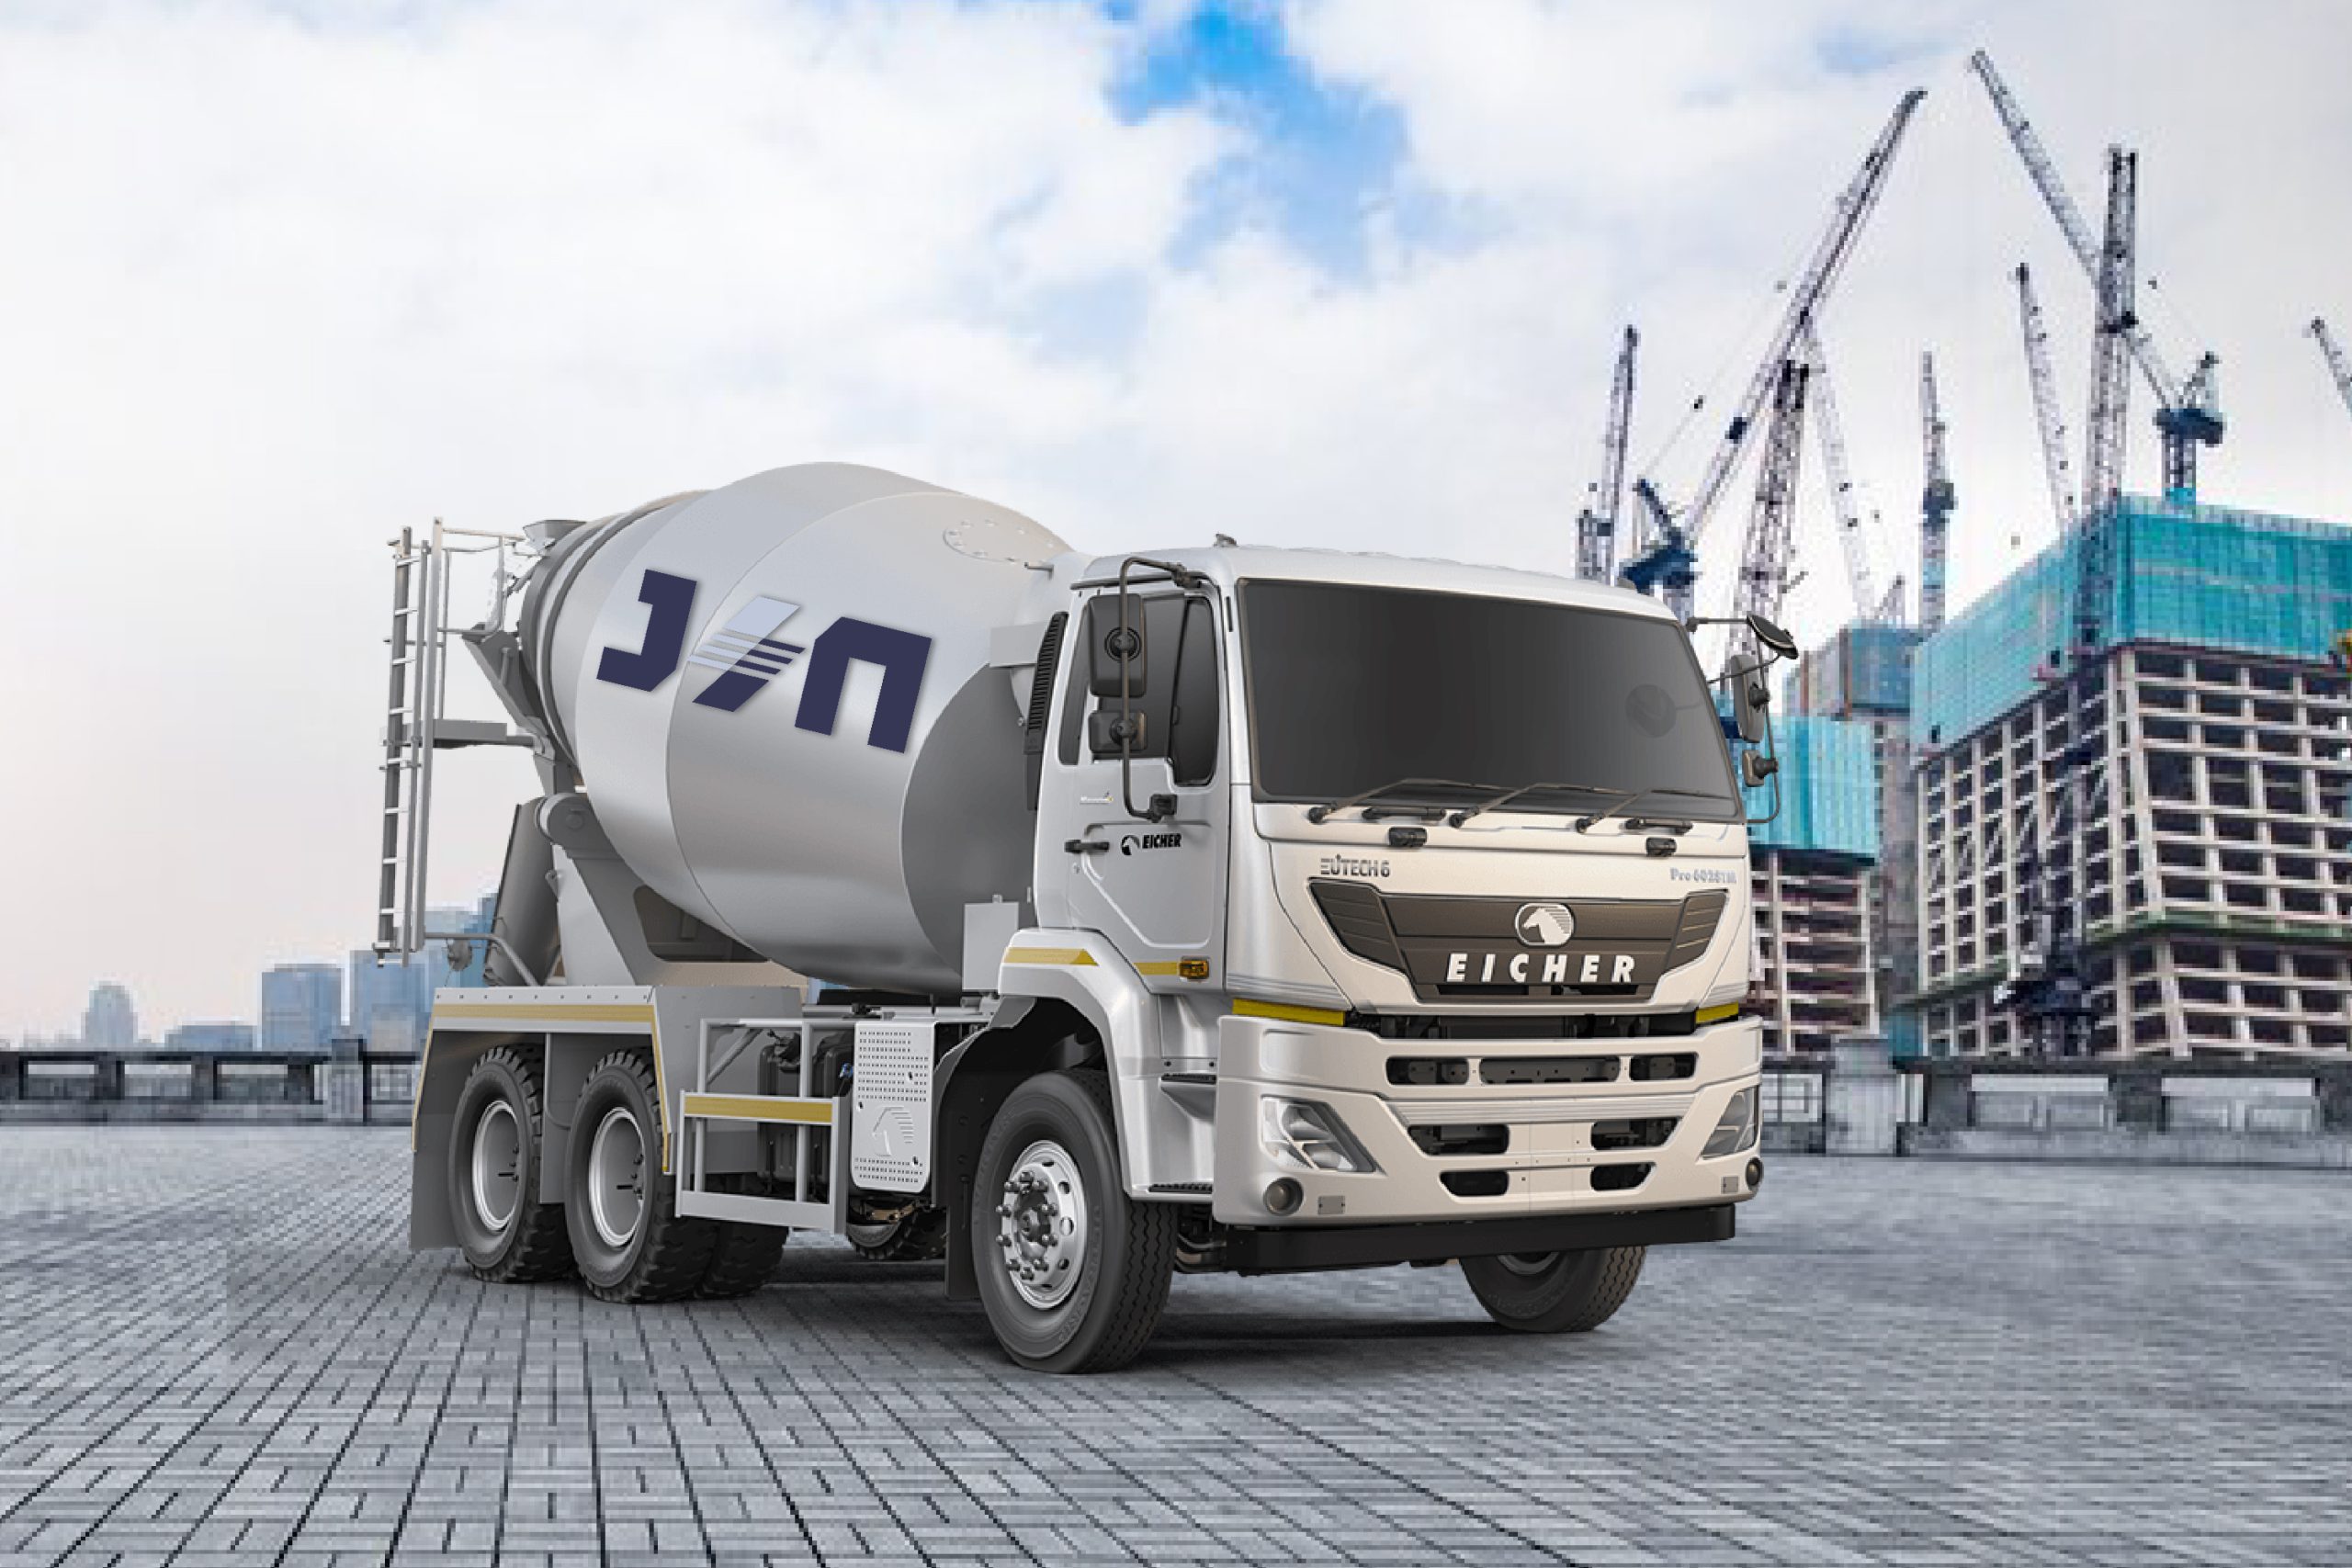 The Benefits of Using Concrete Admixtures for Your Construction Projects